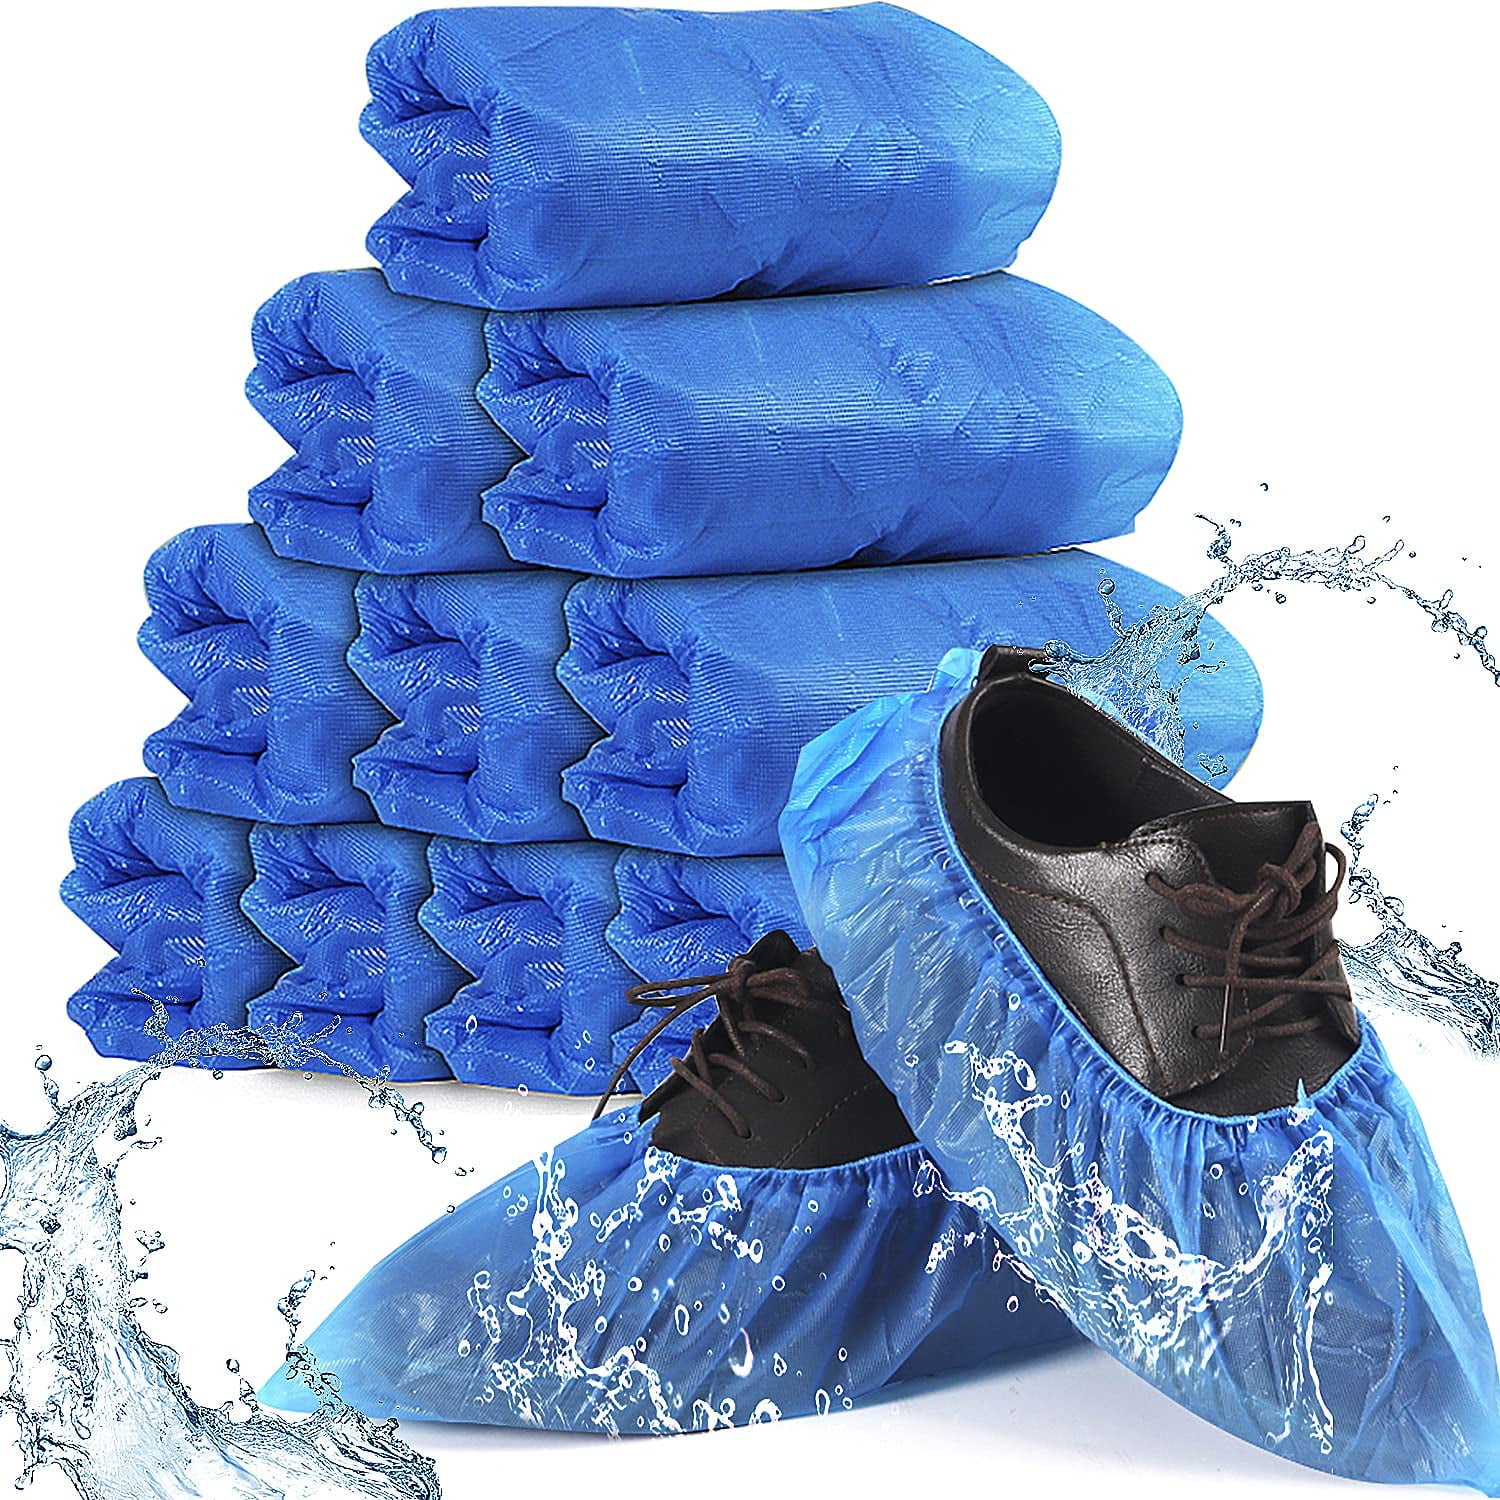 40 Premium Blue Disposable Overshoes Shoe Covers 3.5g Embossed 